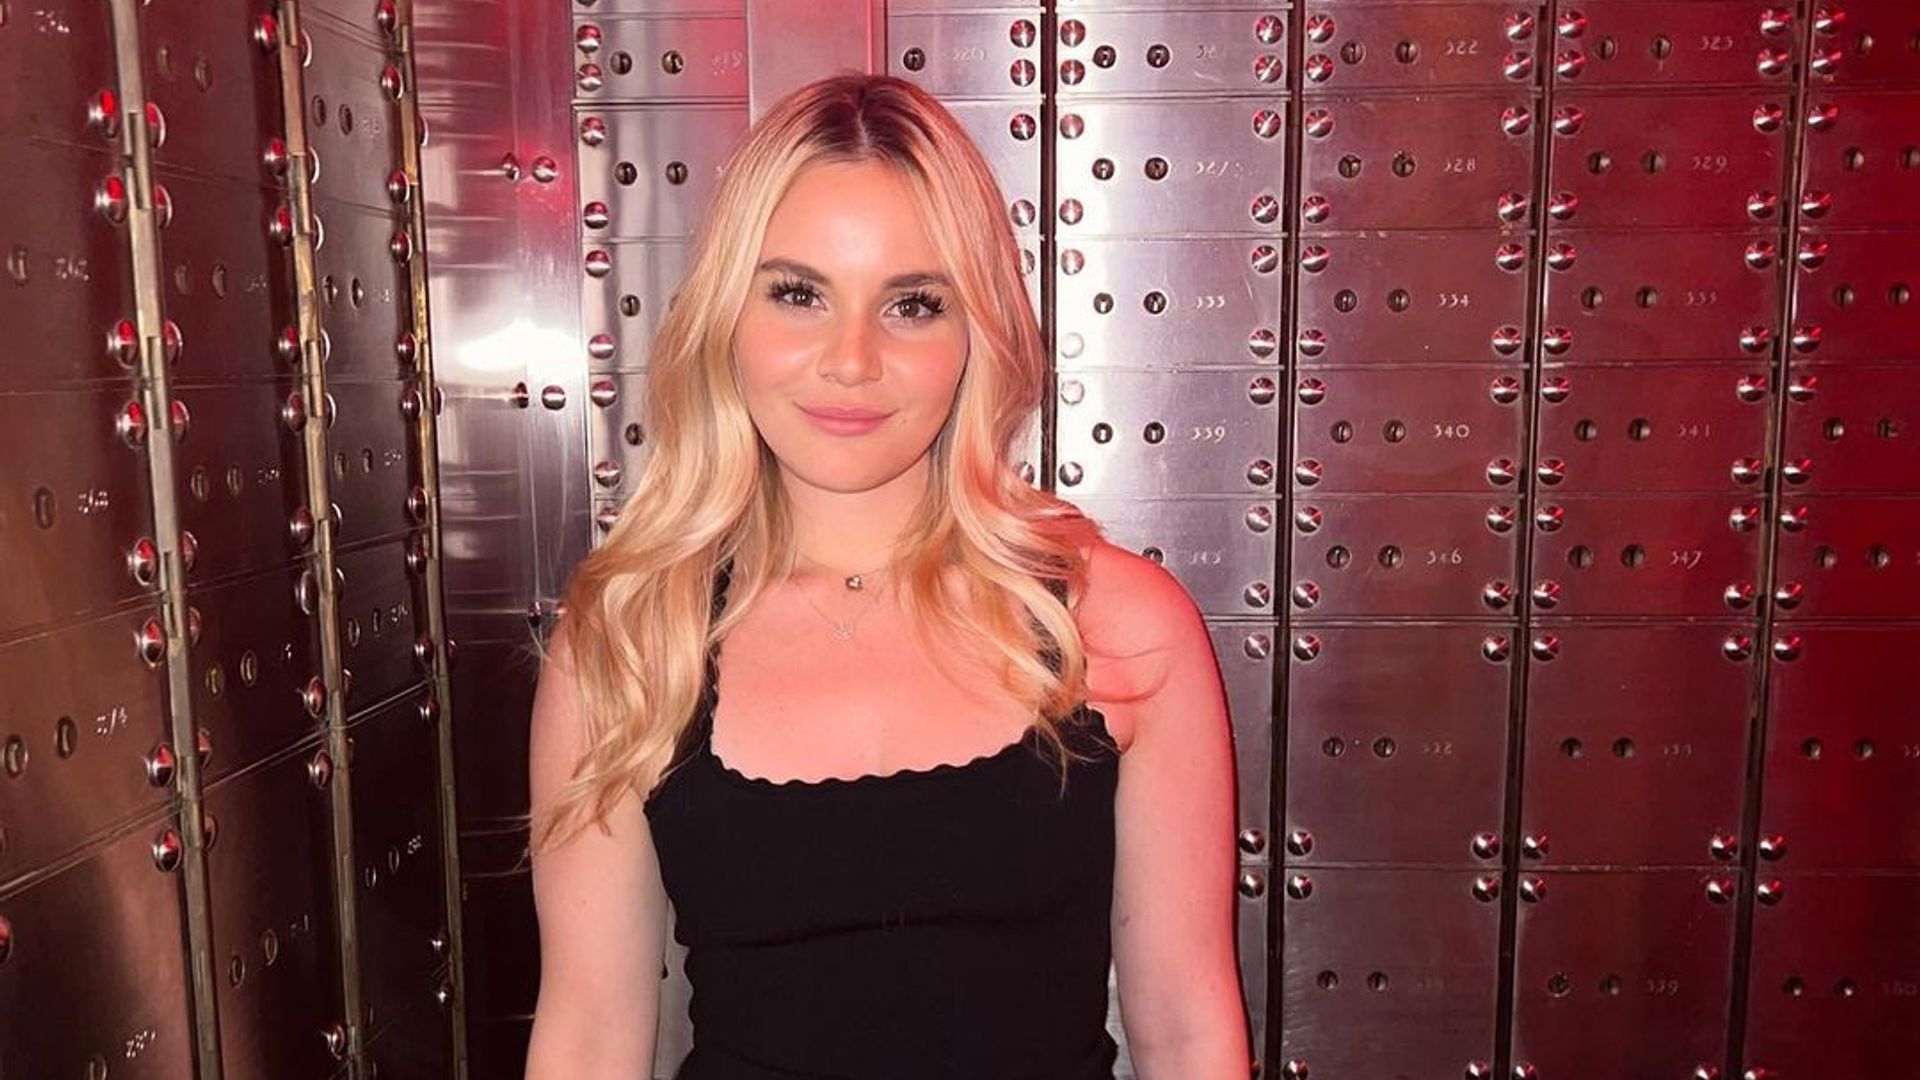 Gordon Ramsay's daughter Holly stuns in thigh-split dress - and boyfriend Adam Peaty has the best reaction